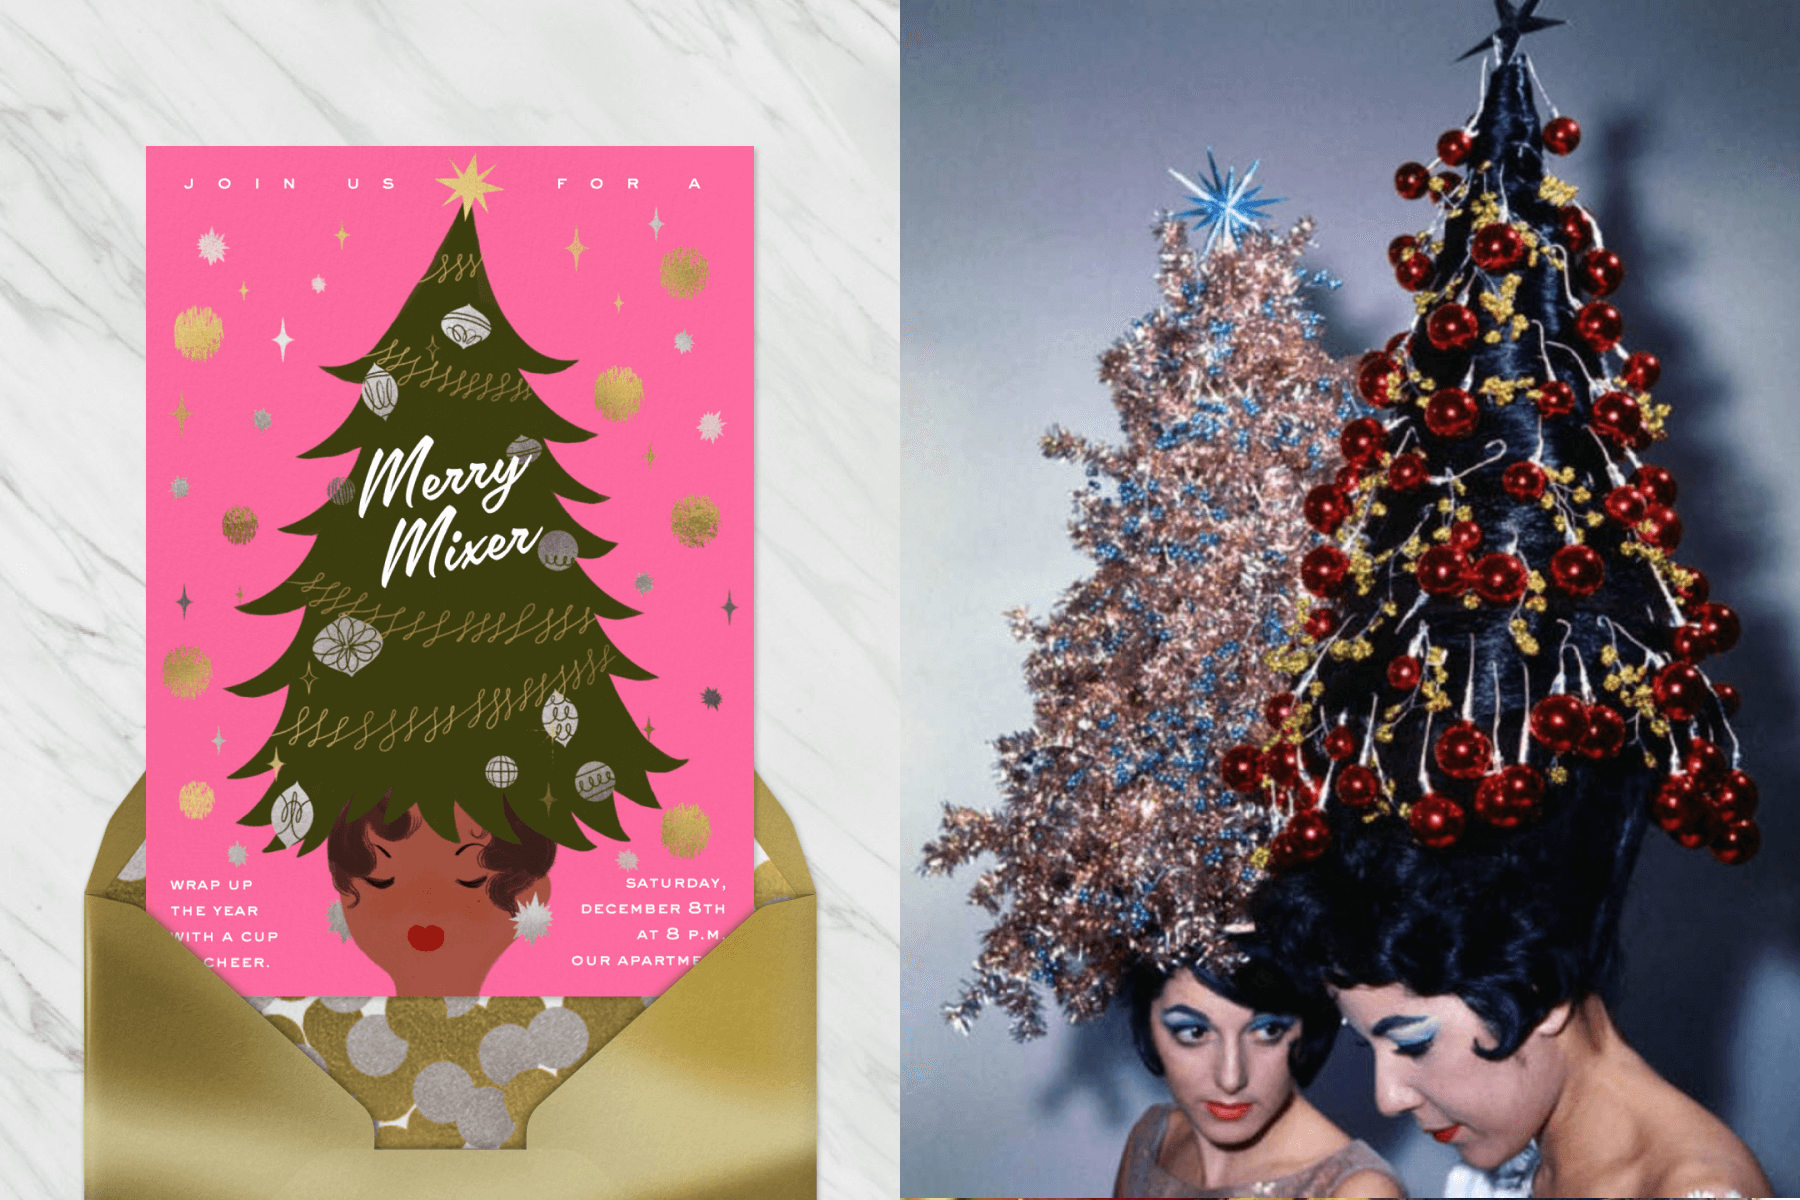 A pink invitation with a woman wearing a hat shaped like a Christmas tree; two women with beehive hairdos decorated to look like Christmas trees.